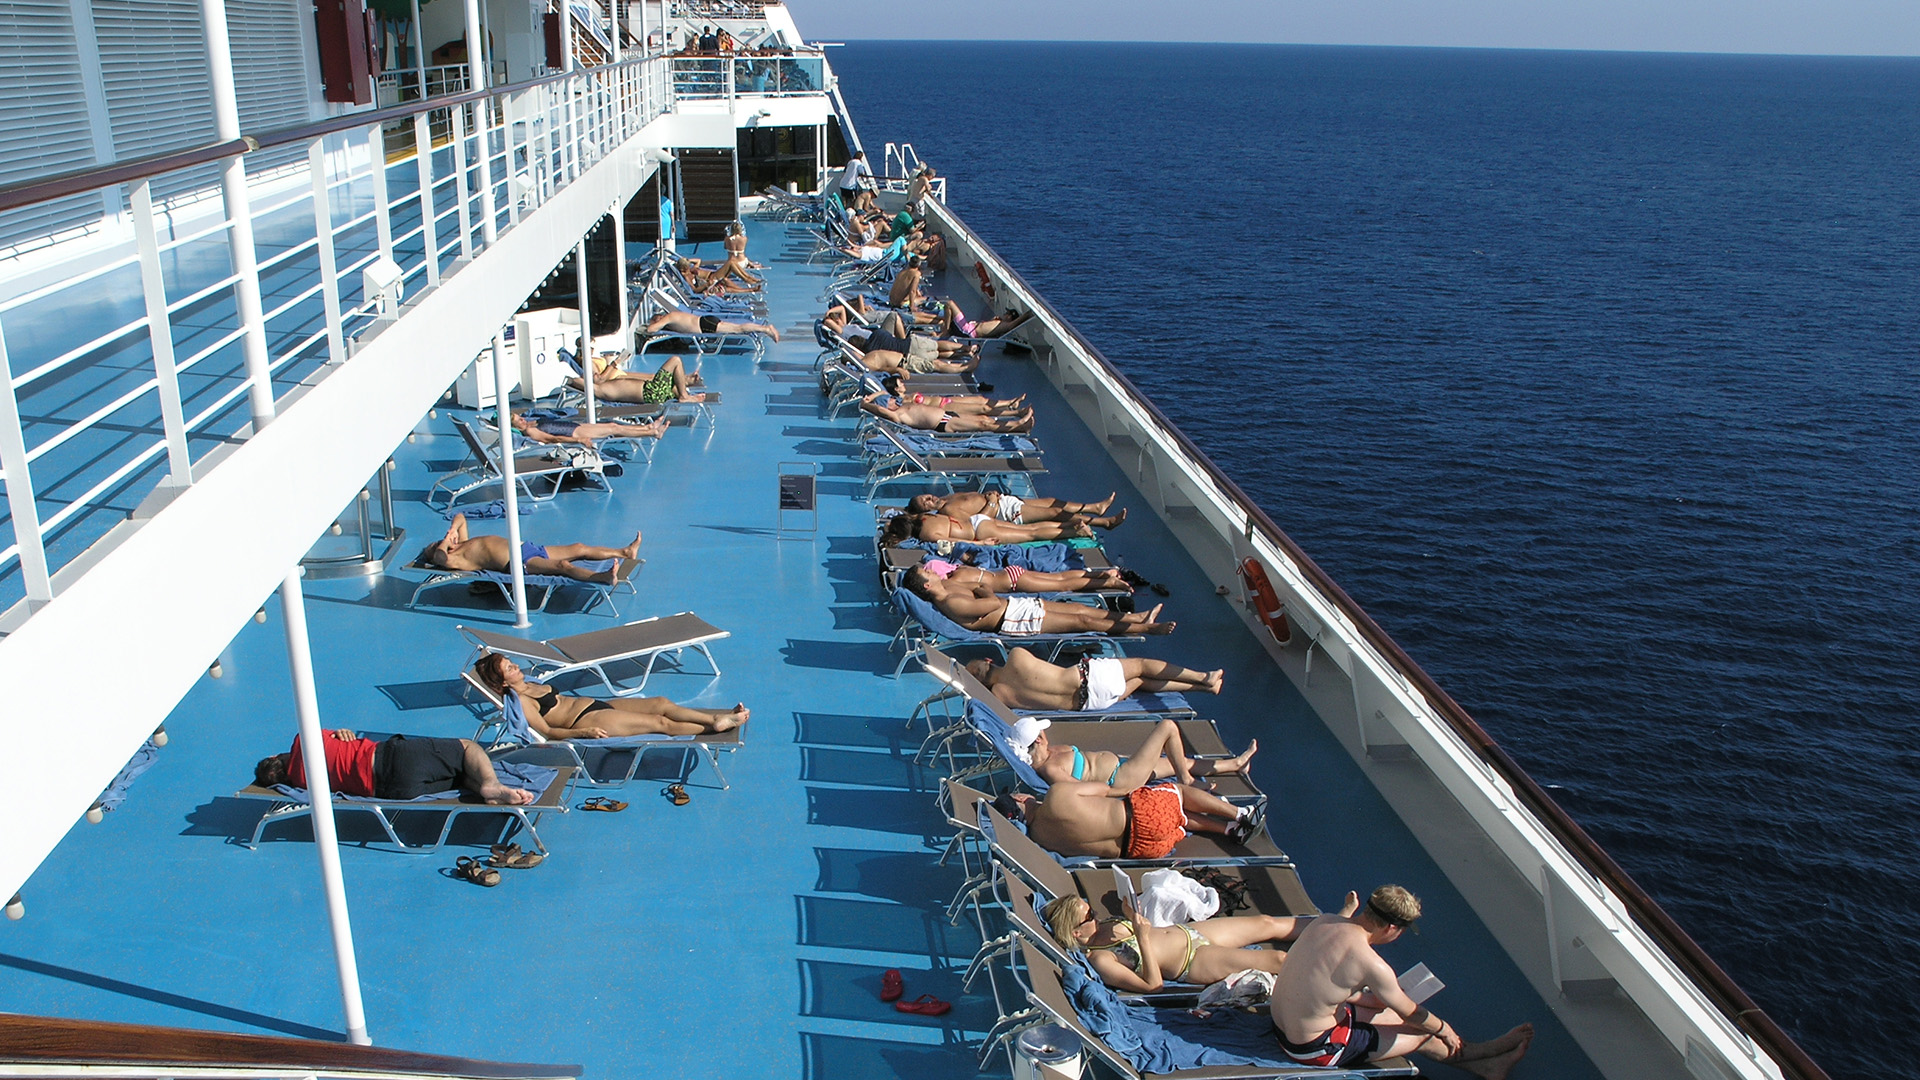 Sunbathers on exterior deck of the Serena. This is from Cruise Ship Diaries. [Photo of the day - May 2023]